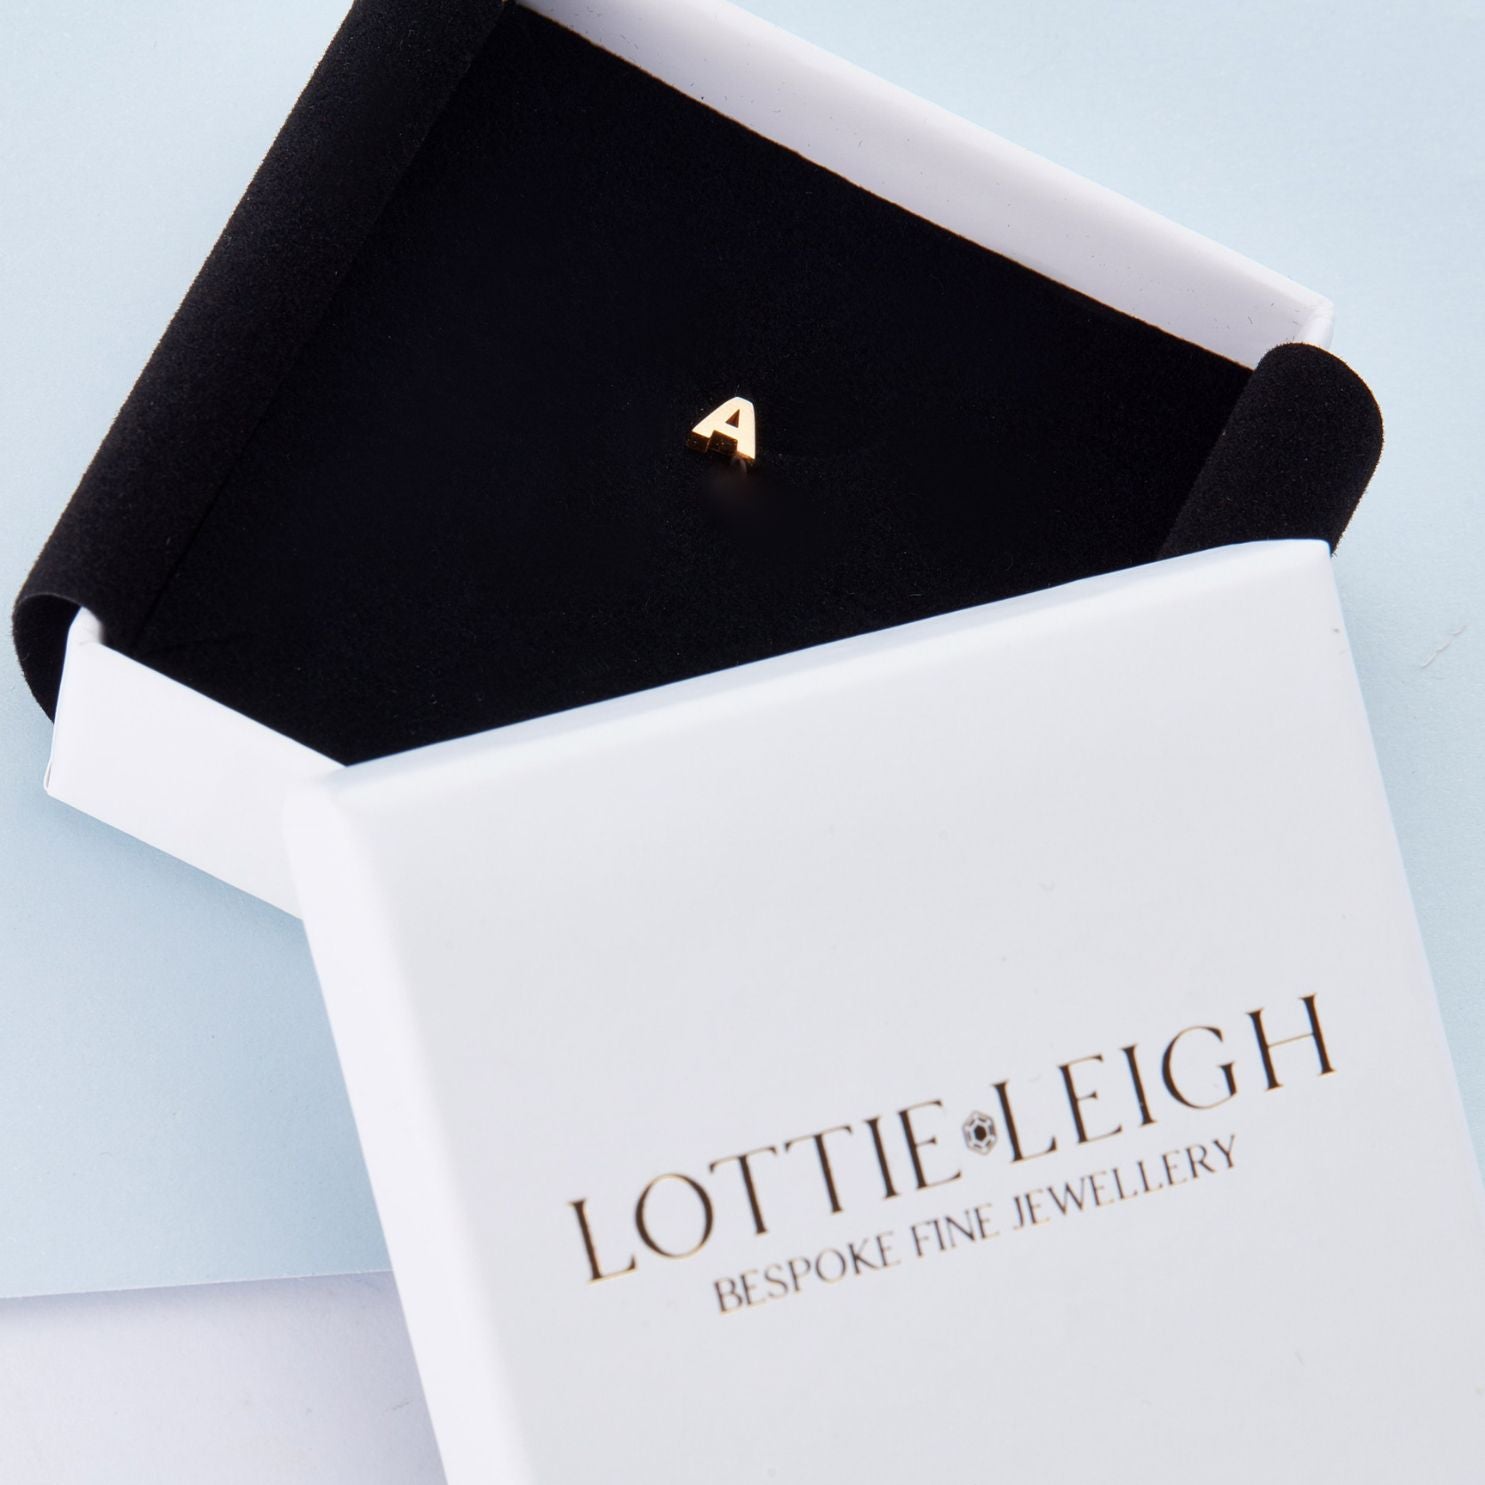 lottie leigh x Helix & Conch collaboration gold initial stud earring - Helix & Conch